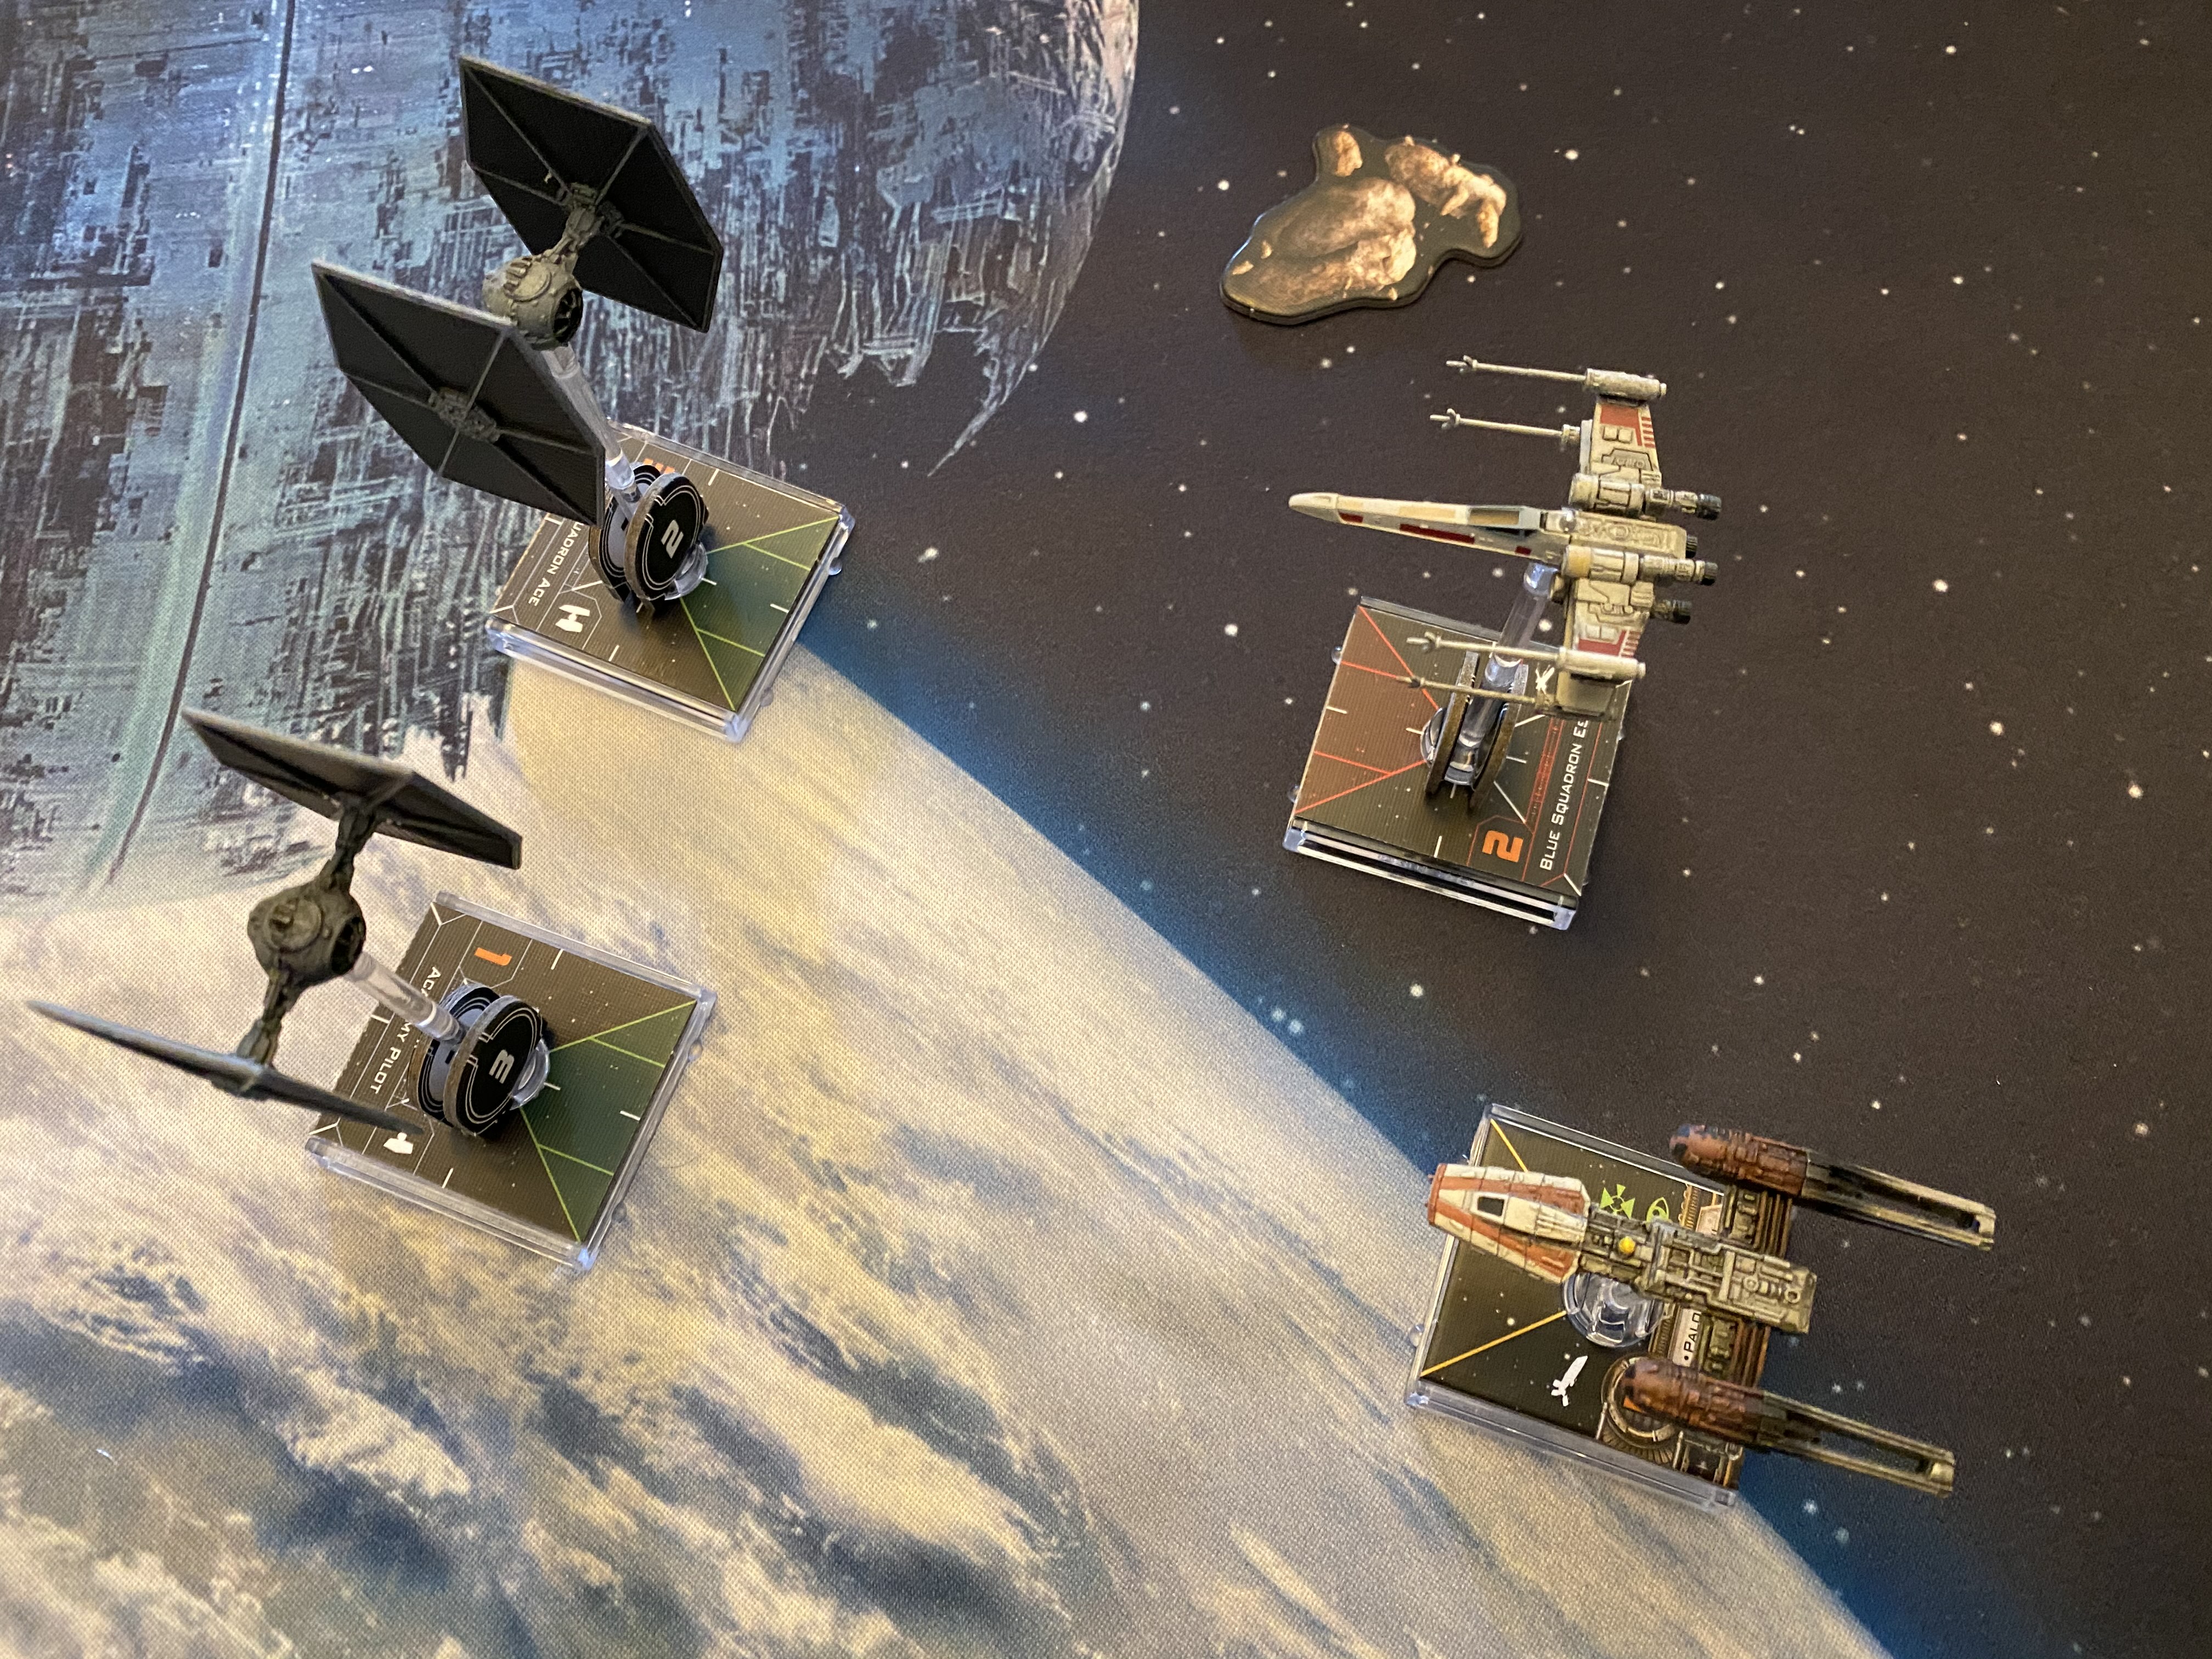 Four small ships (2 TIE fights, an X-wing, and a Y-wing) prepare to engage in battle over the Death Star.